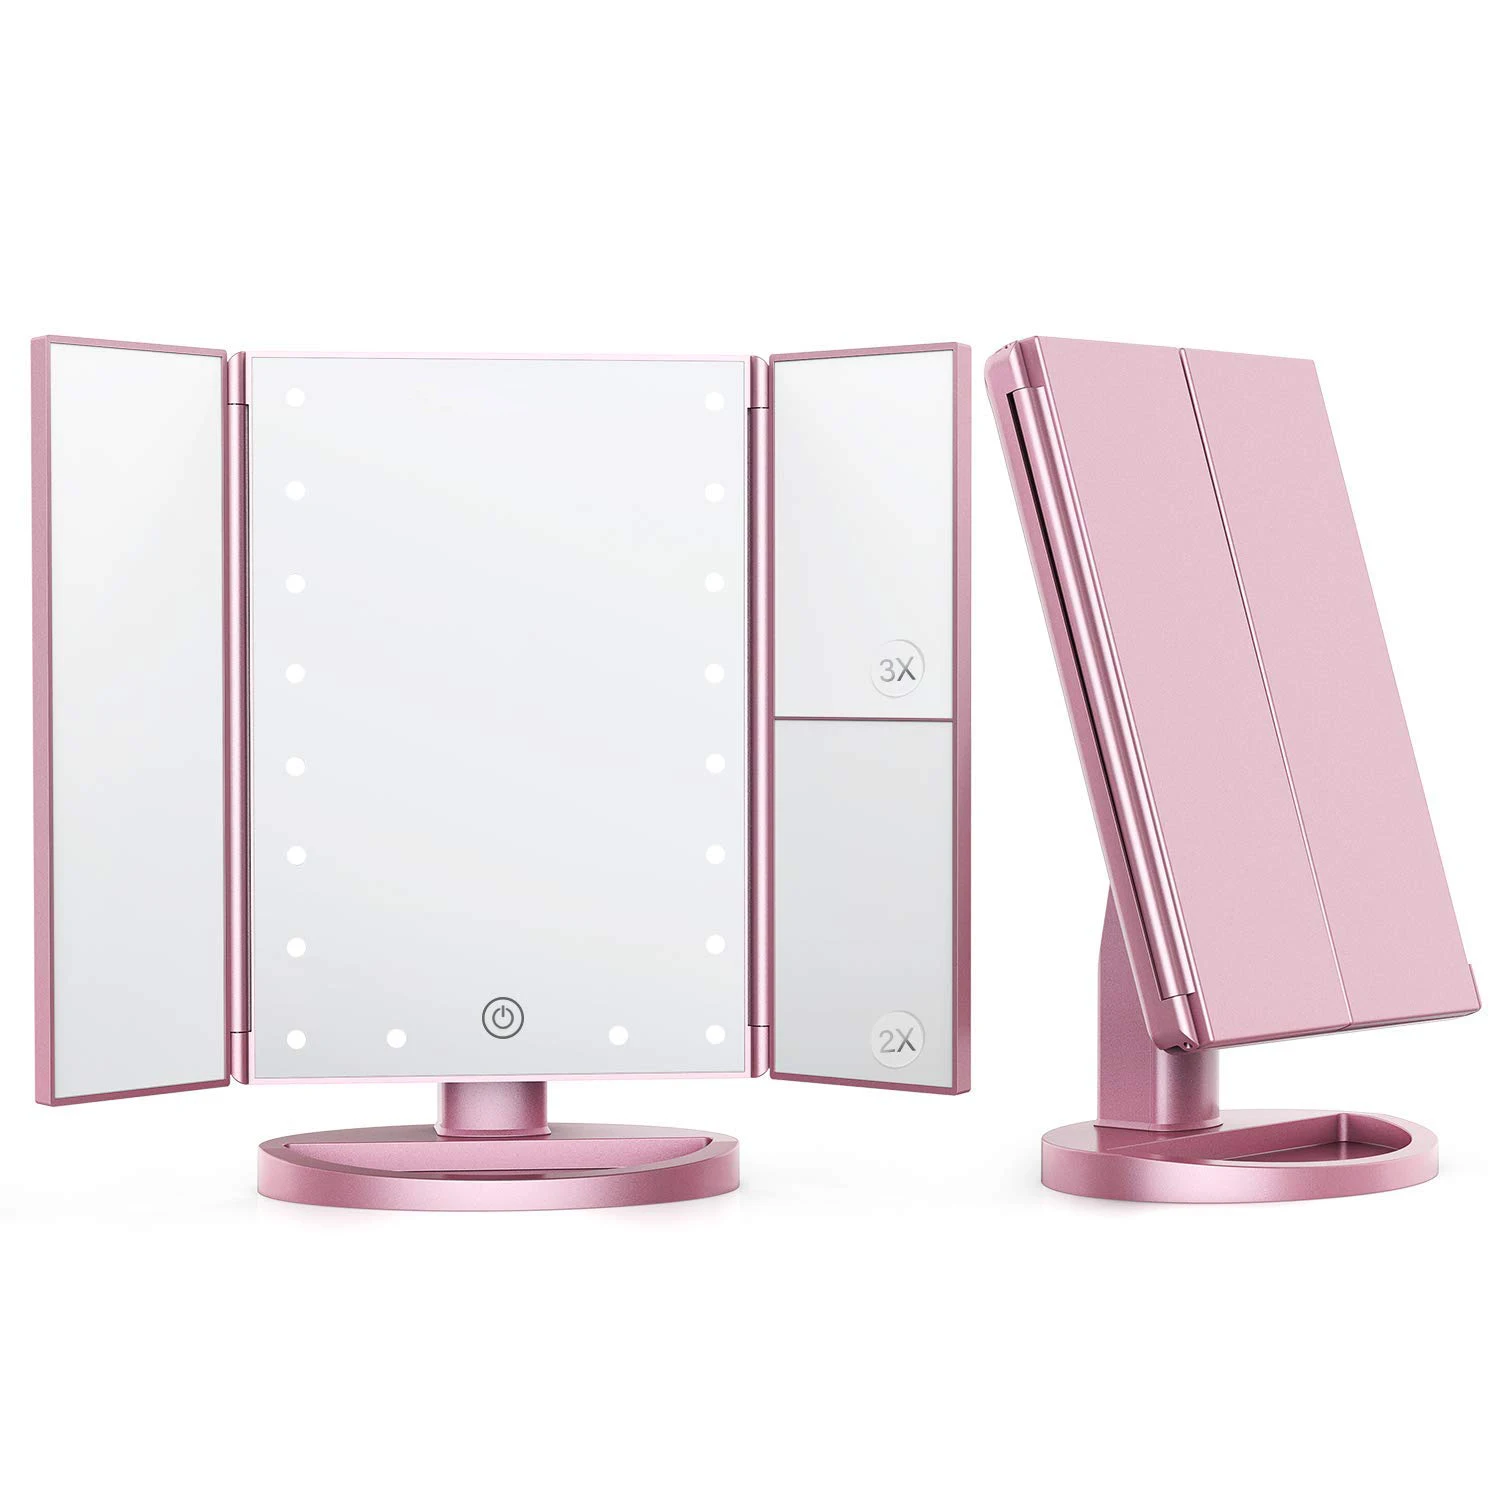 

Cosmetic LED Mirror Makeup OEM Top Sale Trifold Vanity Lighted USB Rechargeable Table Top Make Up Mirror, Customized